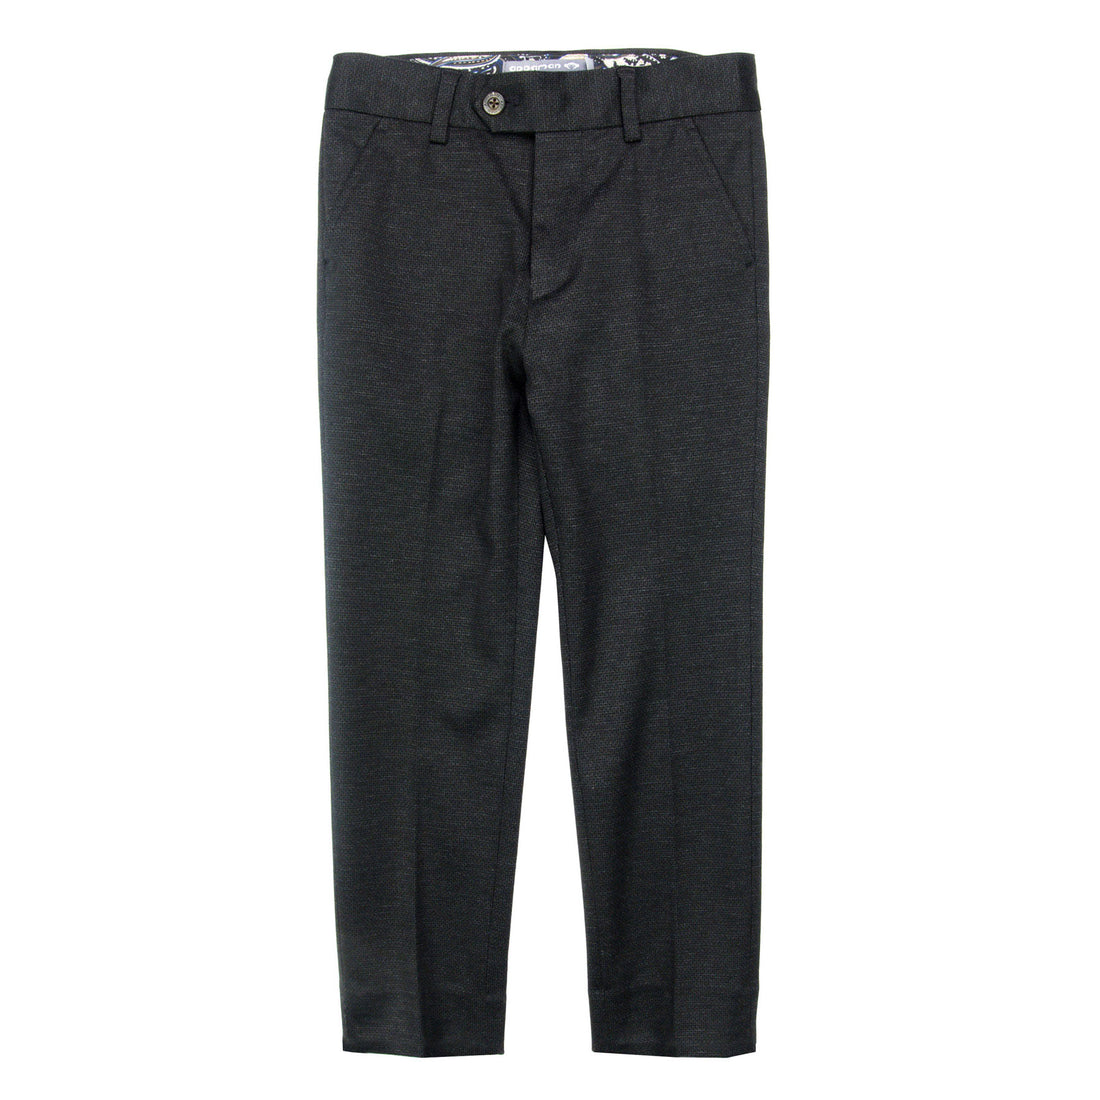 Appaman Charcoal Stretchy Suit Pant